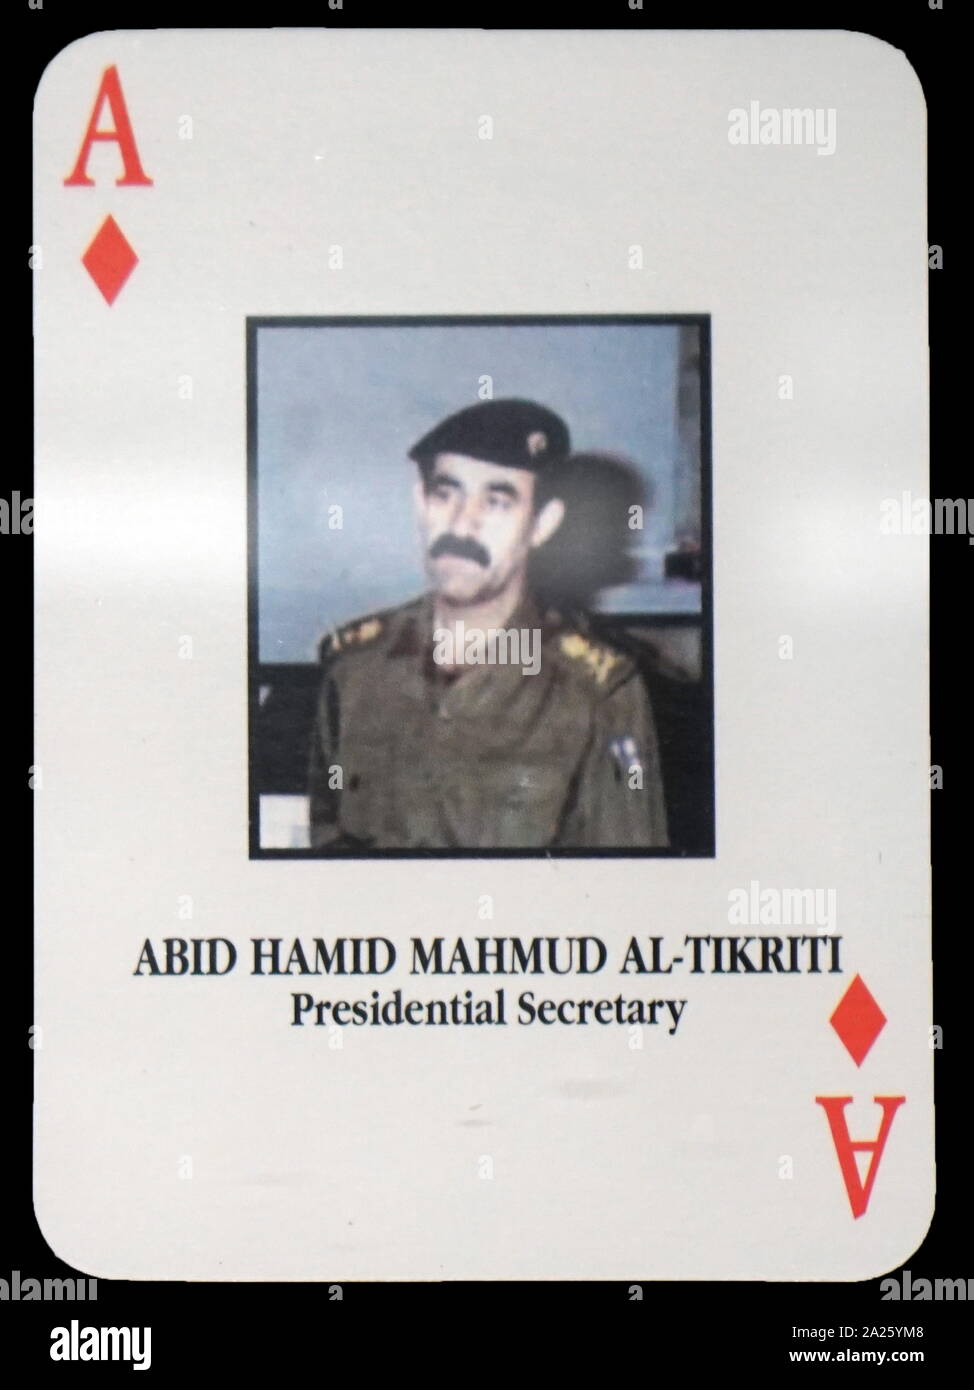 Most-wanted Iraqi playing cards - Abid Hamid Mahmud Al-Tikriti (Presidential Secretary). The U.S. military developed a set of playing cards to help troop identify the most-wanted members of President Saddam Hussein's government during the 2003 invasion of Iraq. Stock Photo